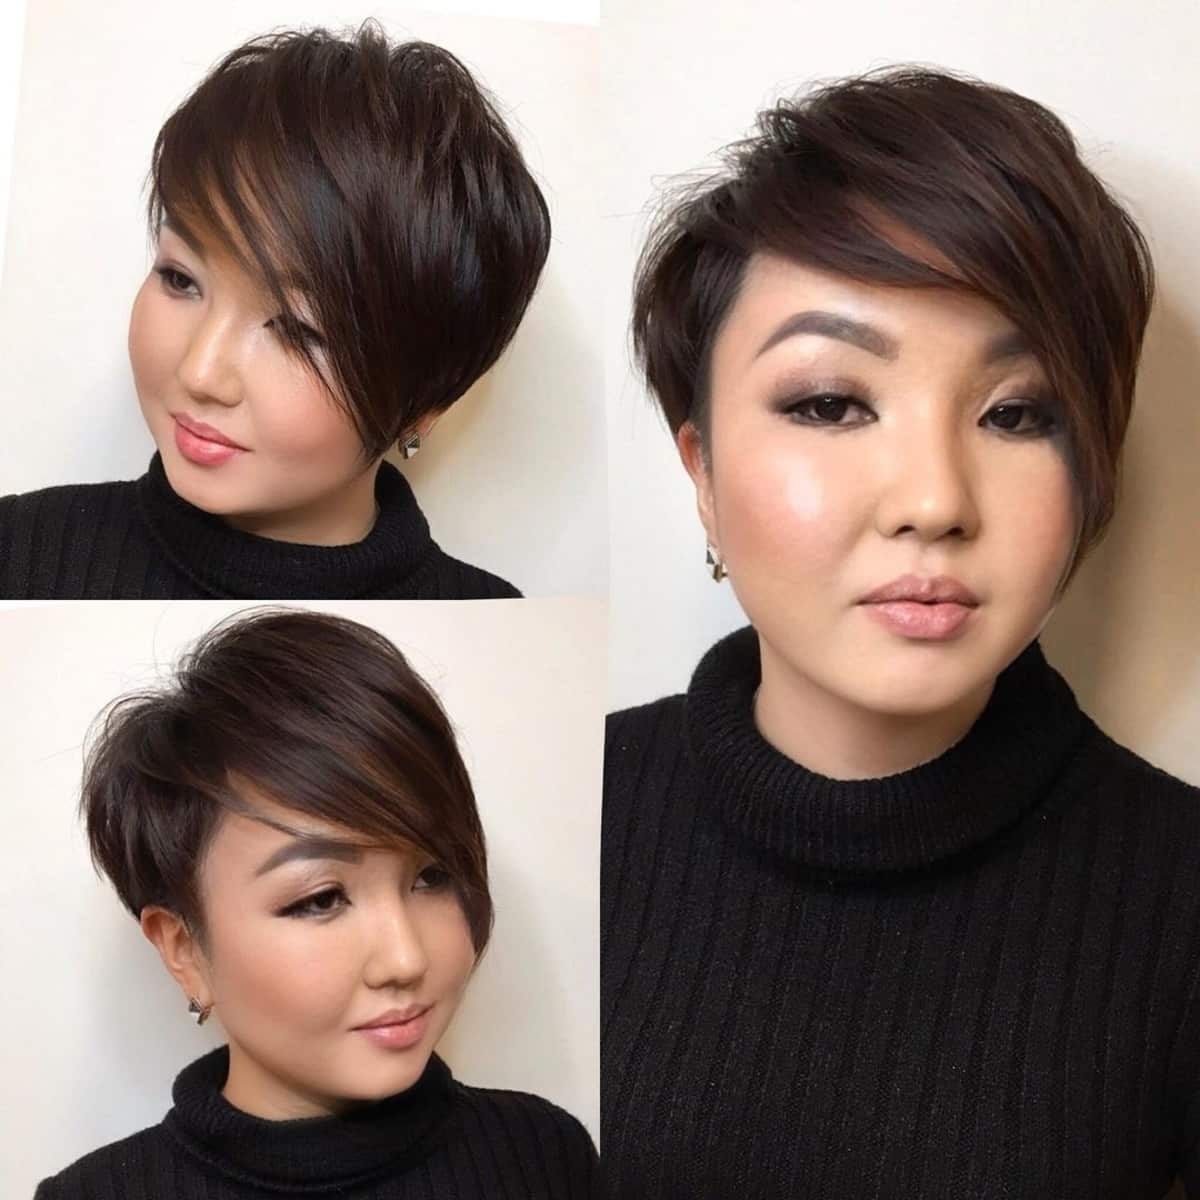 26 Most Flattering Ways to Get a Pixie Cut for a Round Face